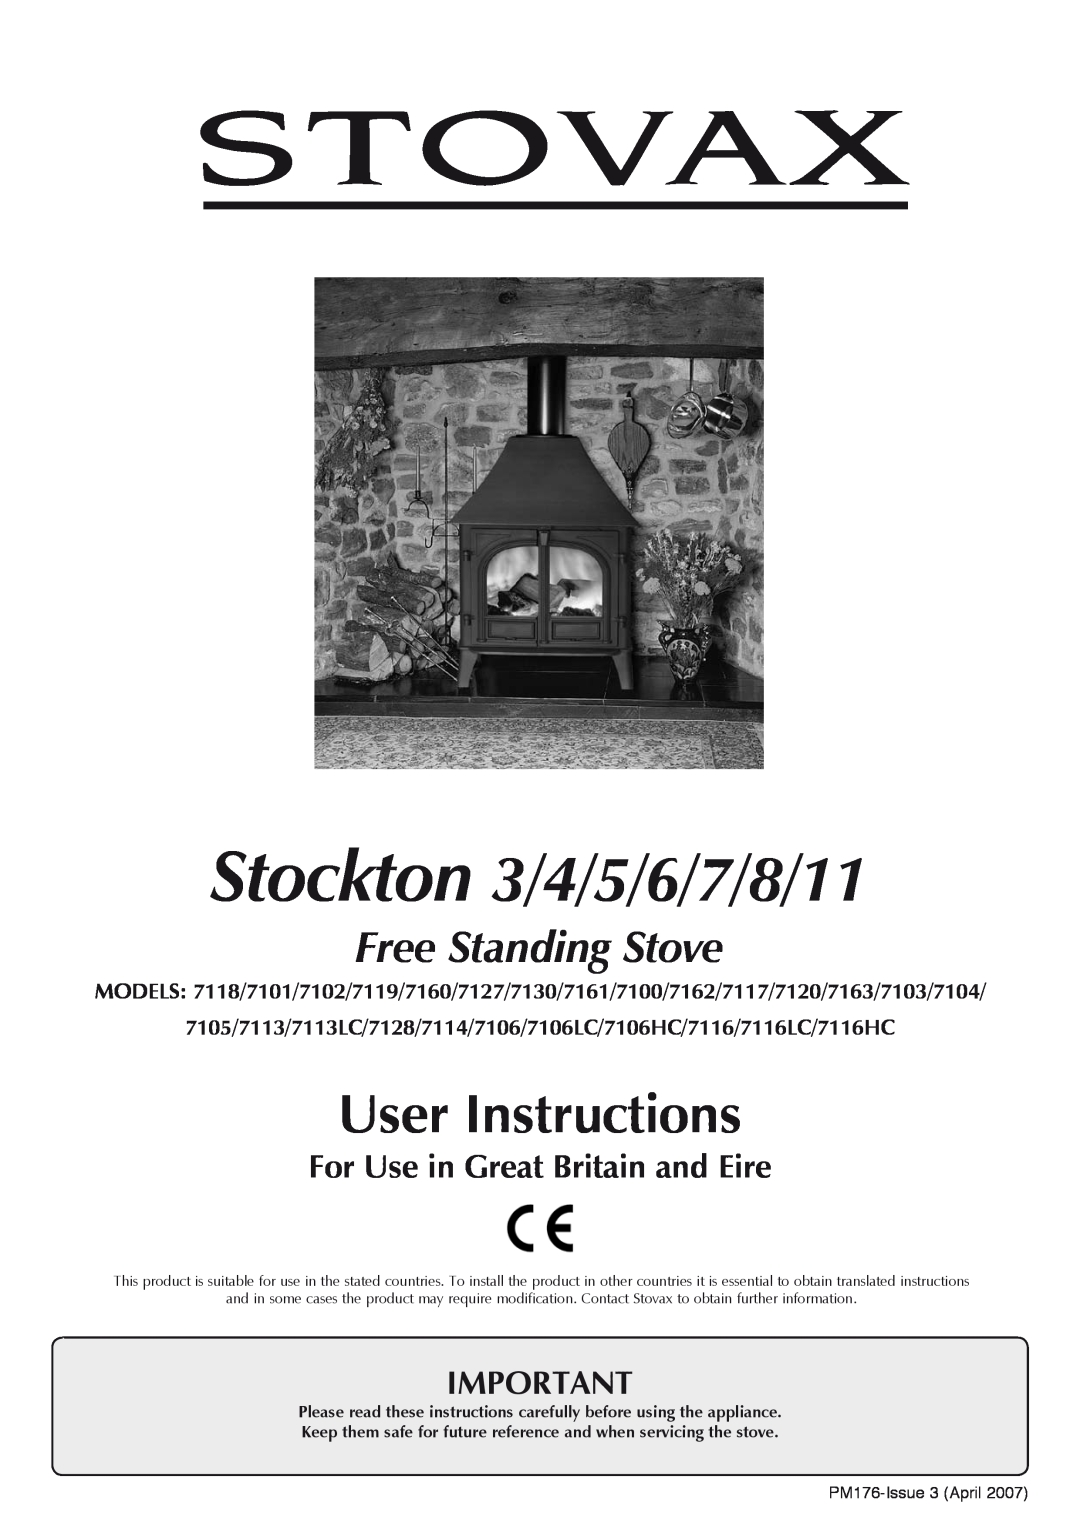 Stovax 7118 manual Stockton 3/4/5/6/7/8/11, User Instructions, Free Standing Stove, For Use in Great Britain and Eire 